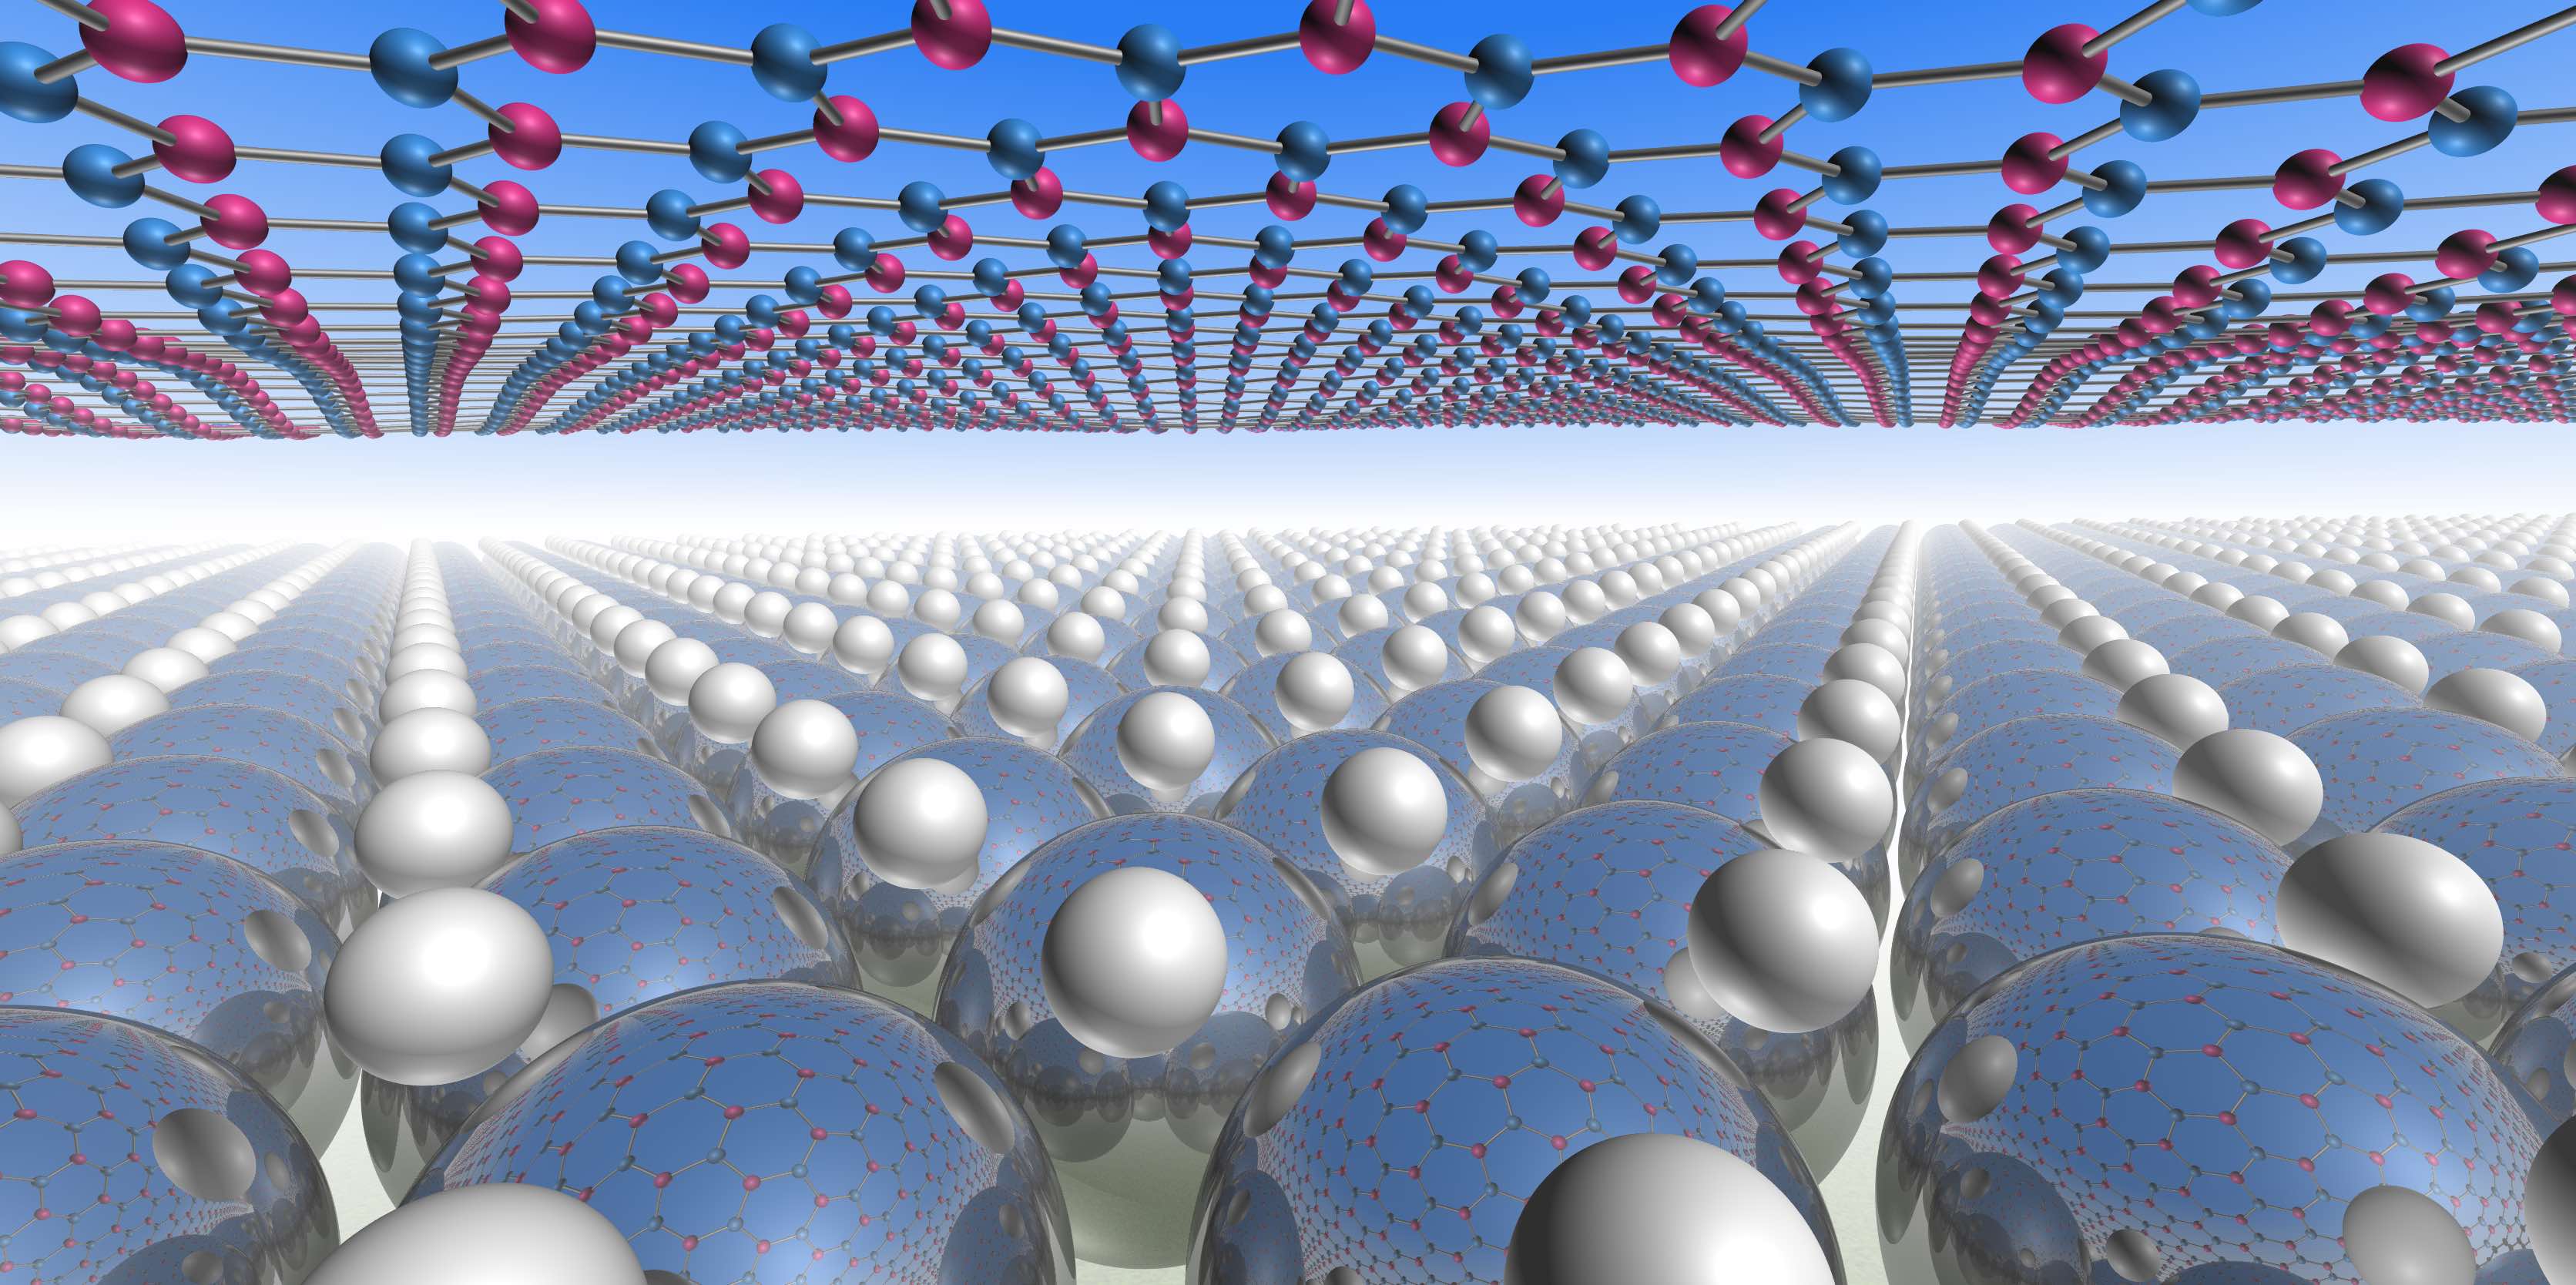 symbolic image of two dimensional materials